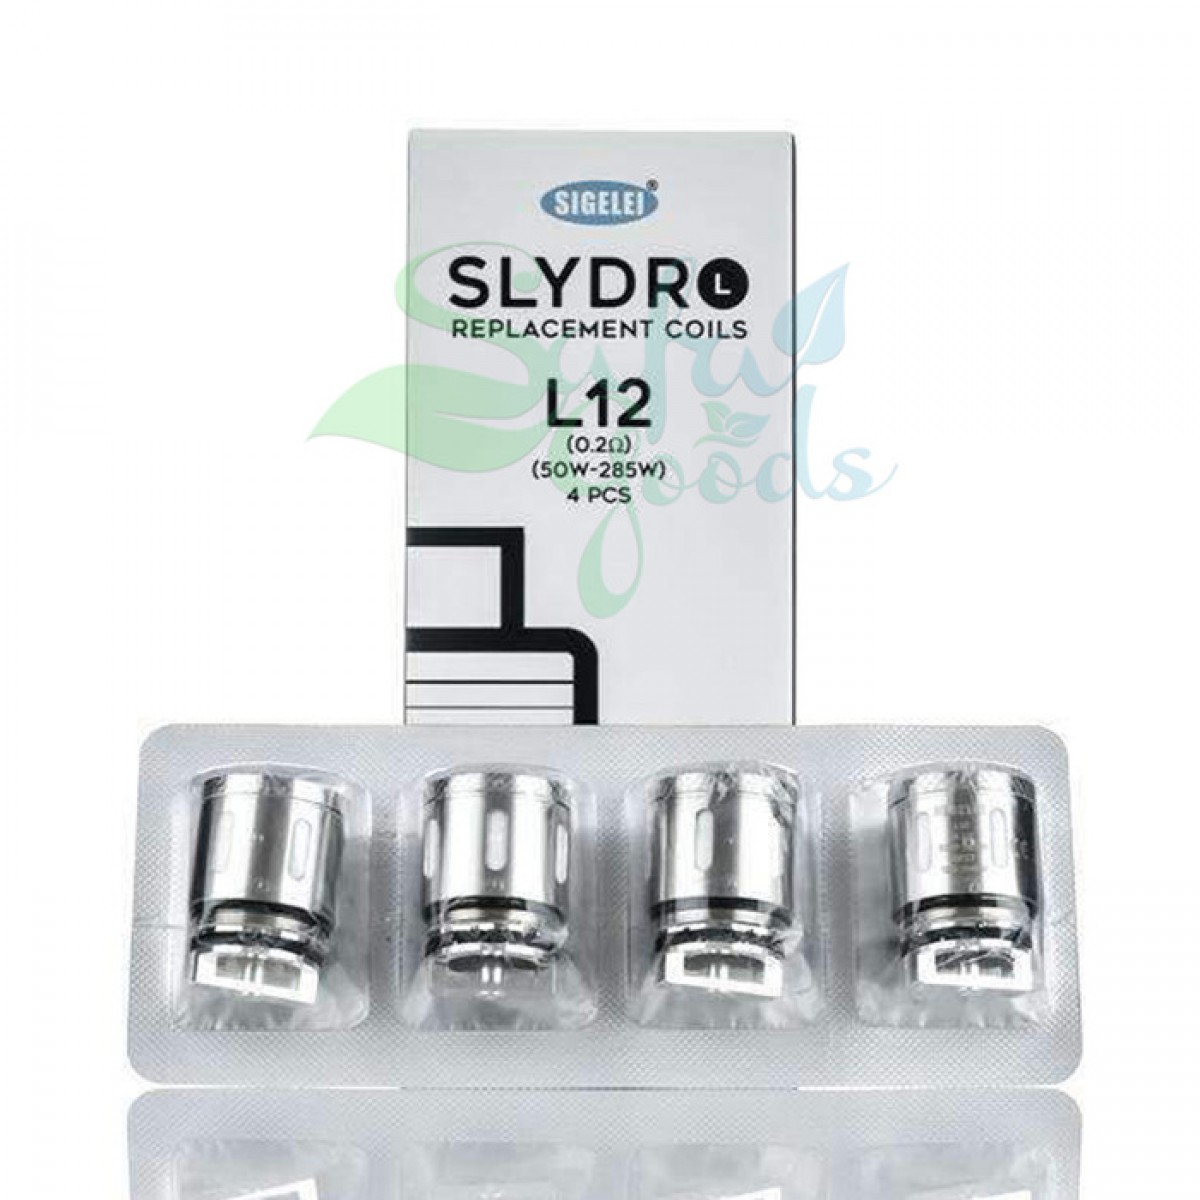 Sigelei SLYDR Replacement Coils - 4 PACK